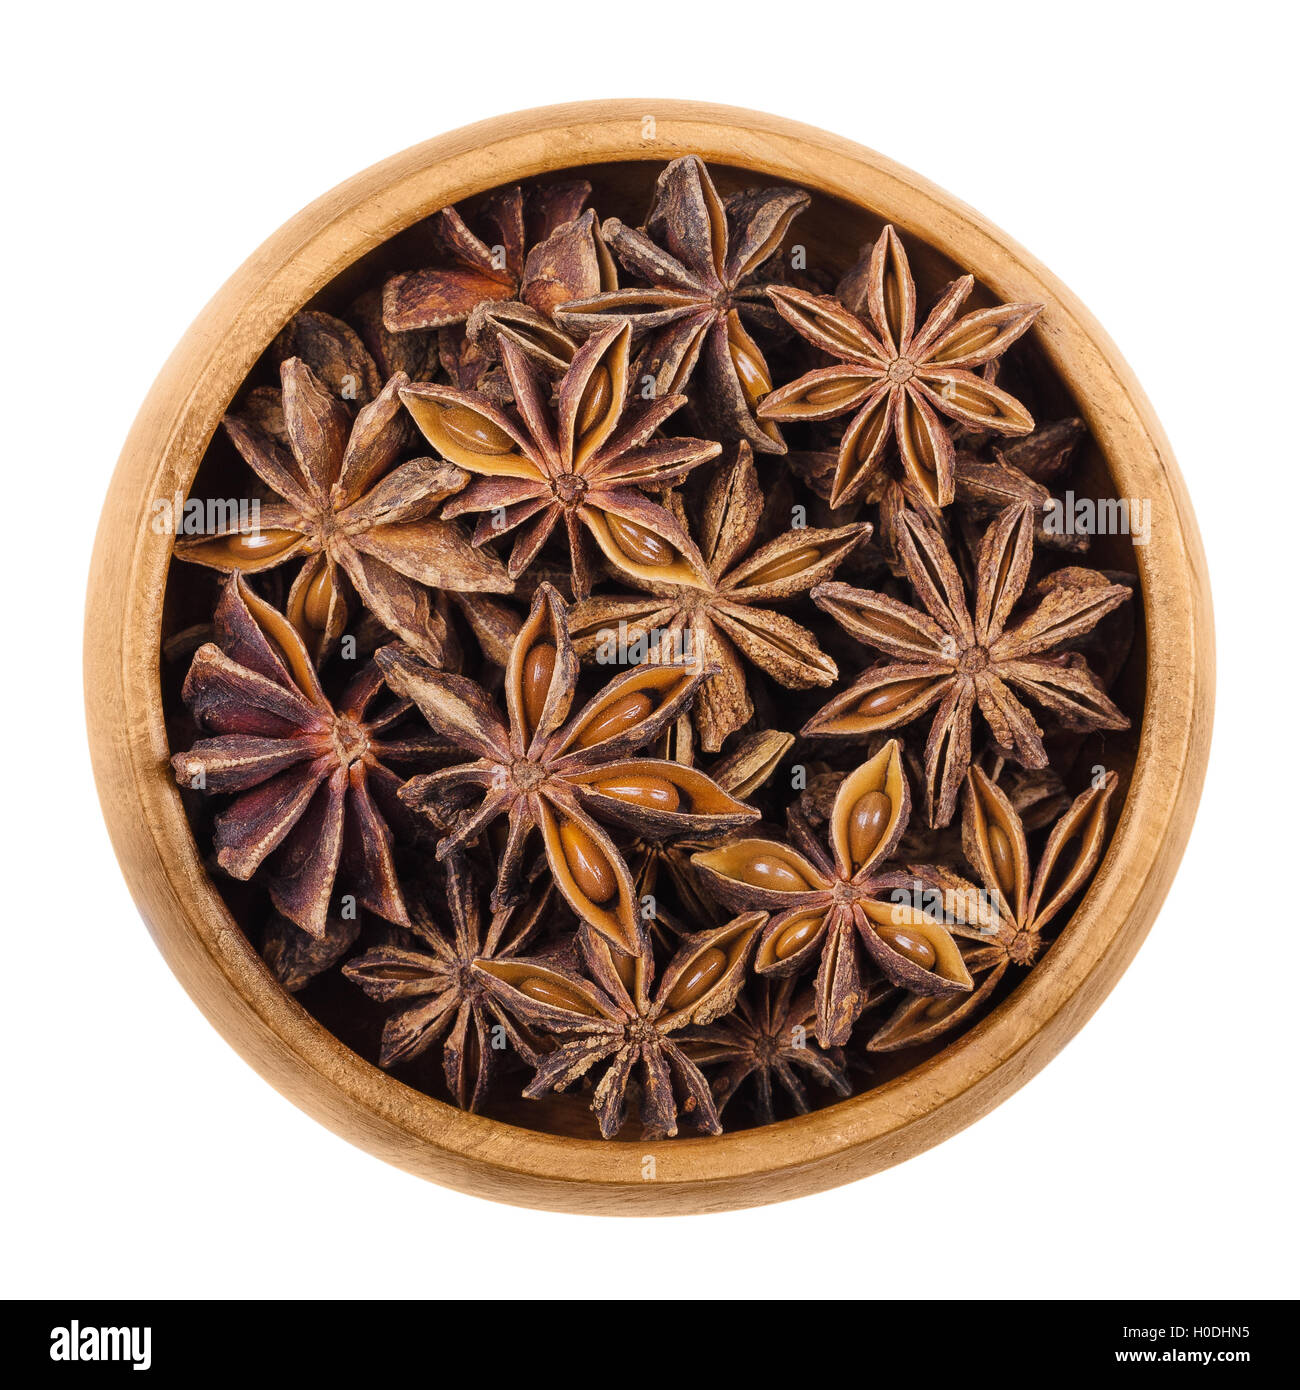 Star anise seeds in a wooden bowl over white. Dried fruits of Illicium verum, also Chinese star anise or badiam. Stock Photo